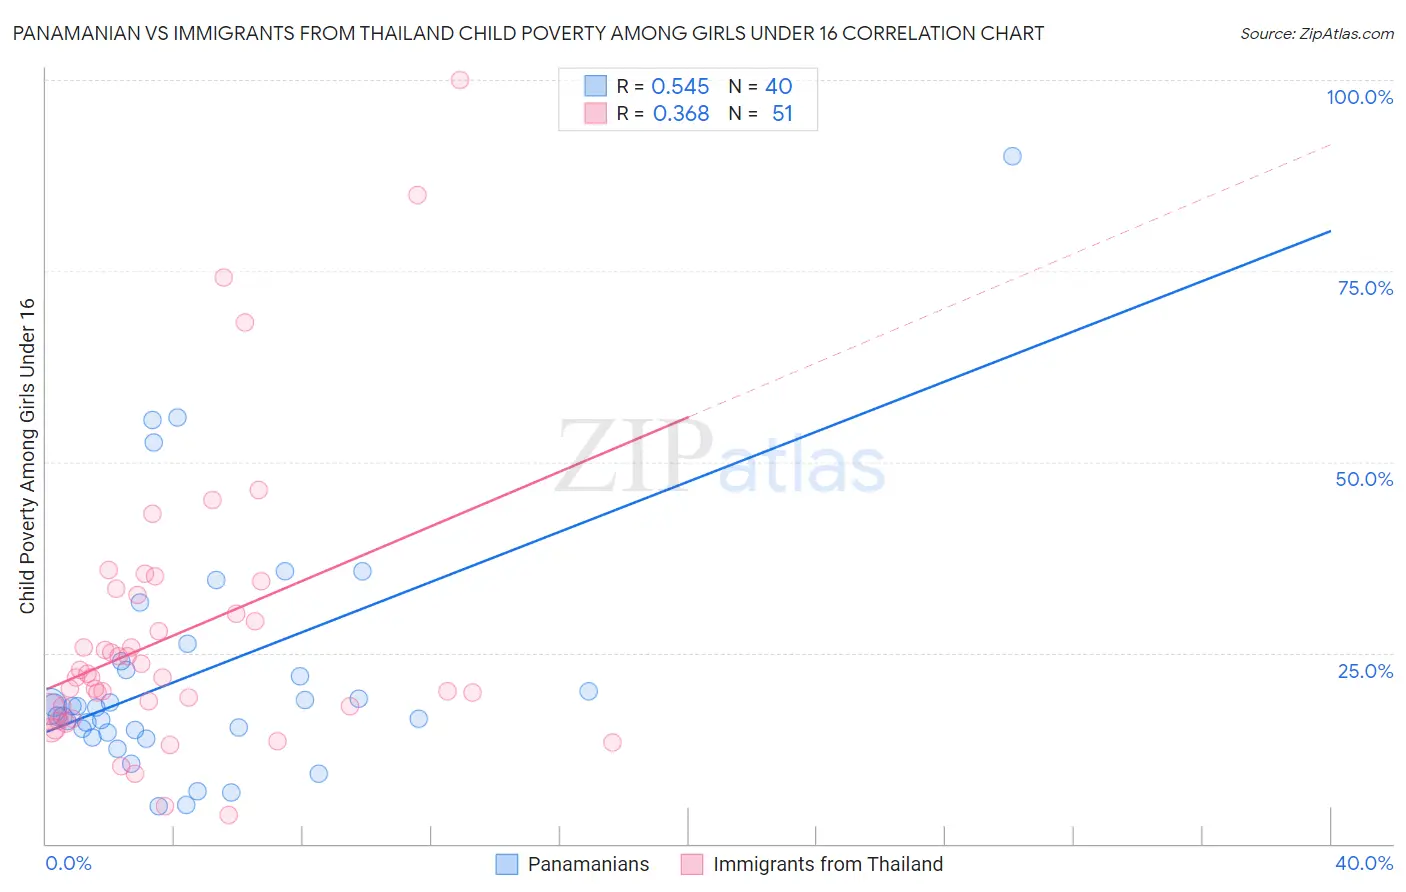 Panamanian vs Immigrants from Thailand Child Poverty Among Girls Under 16